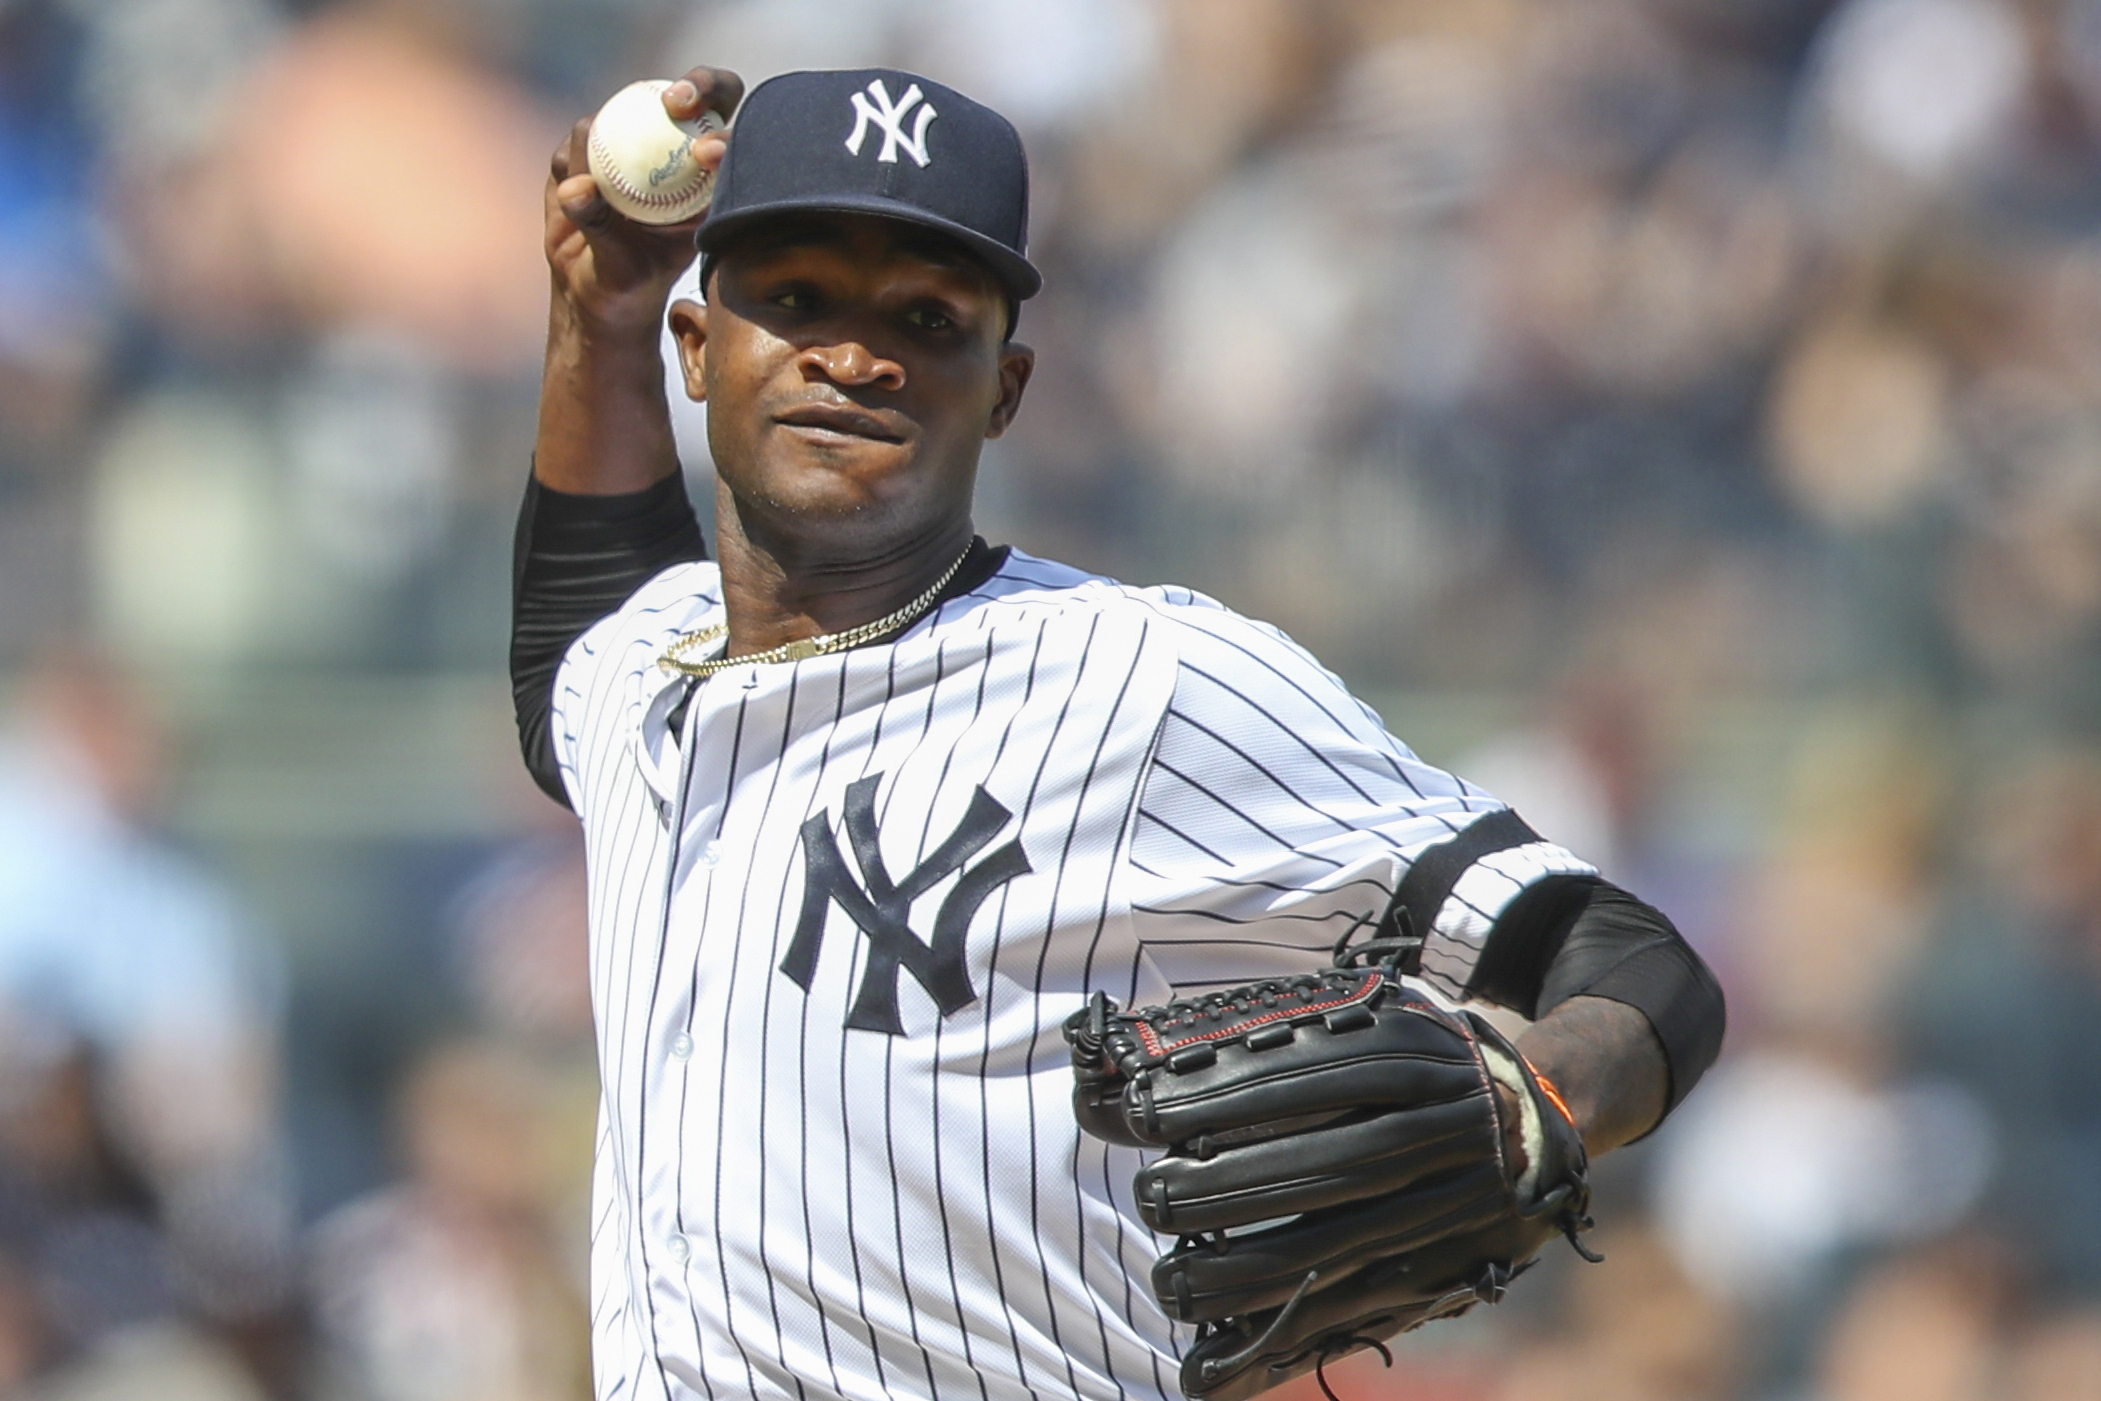 Yankees pitcher Domingo German suspended for domestic violence